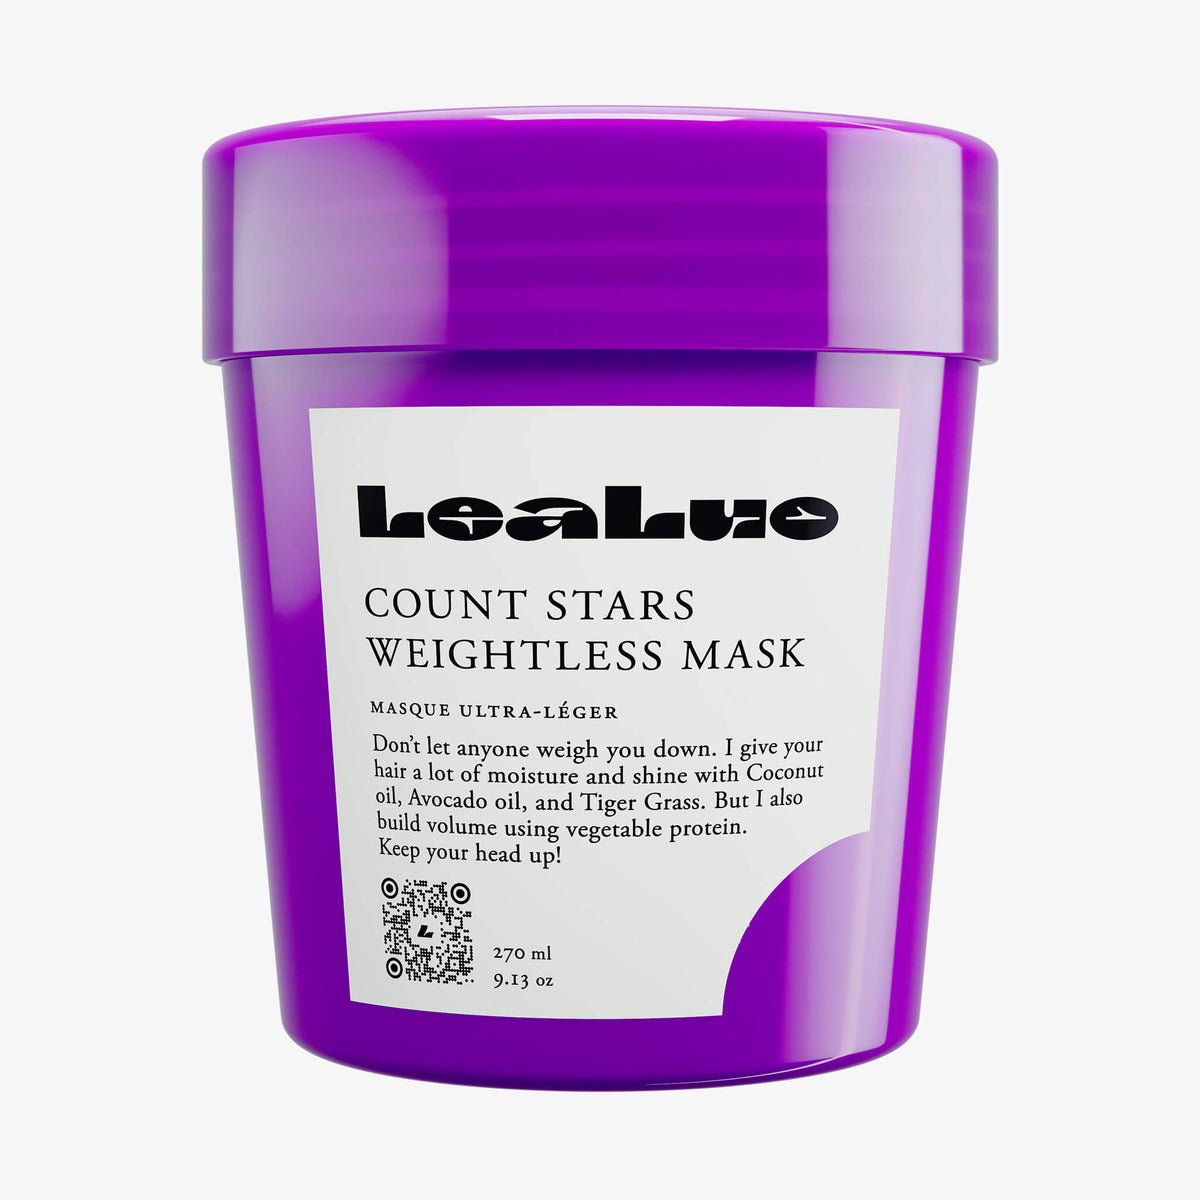 LeaLuo | Count Stars Weightless Mask